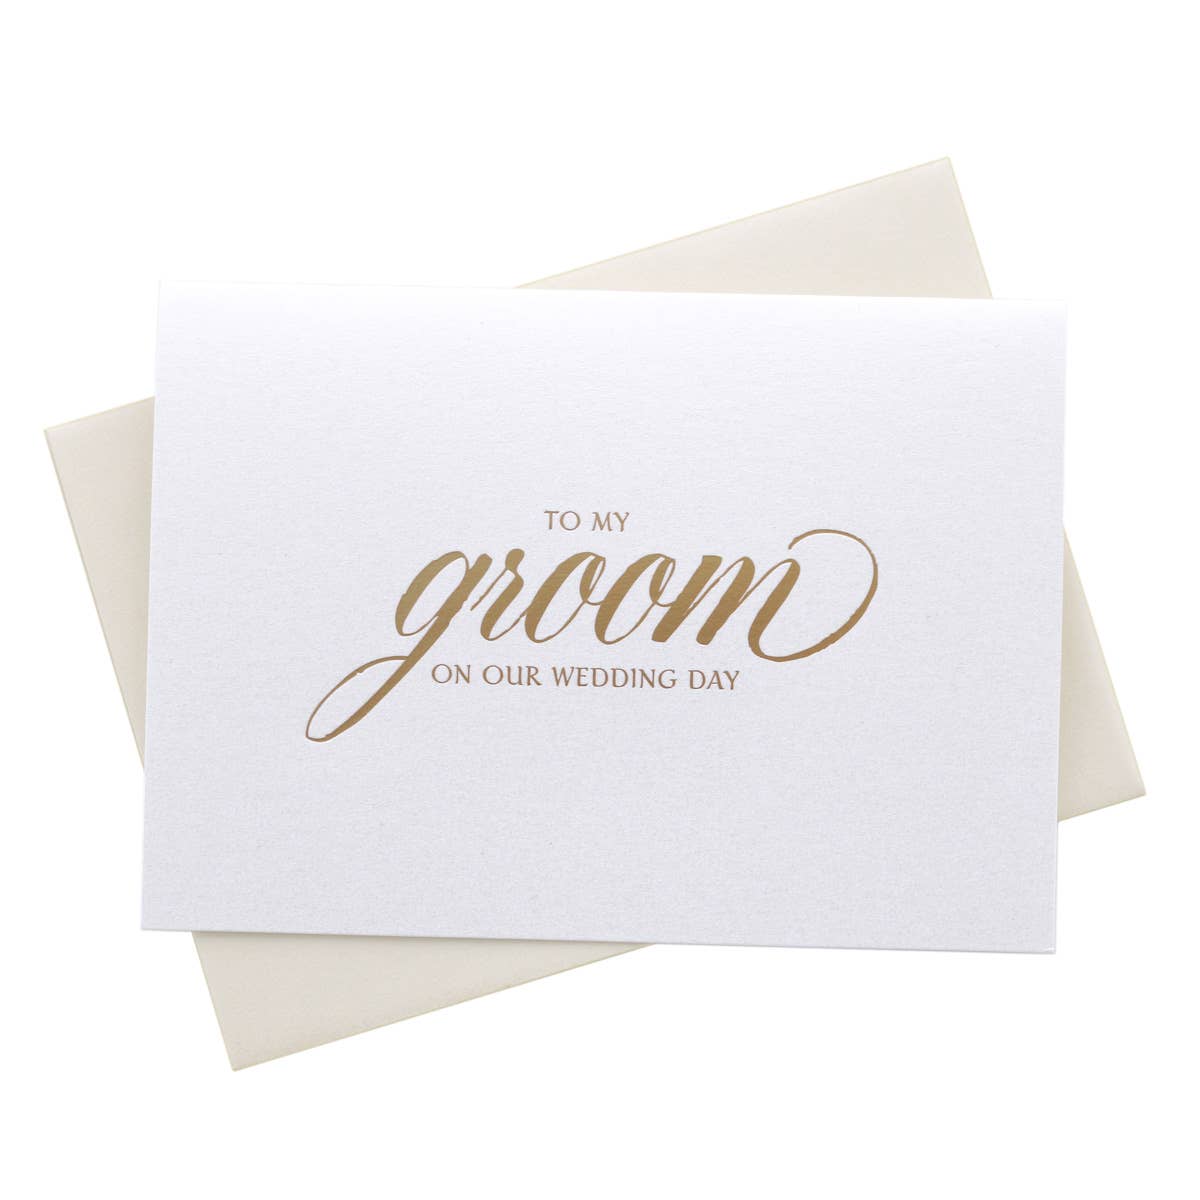 Gold Foil Card to My Groom on Our Wedding Day